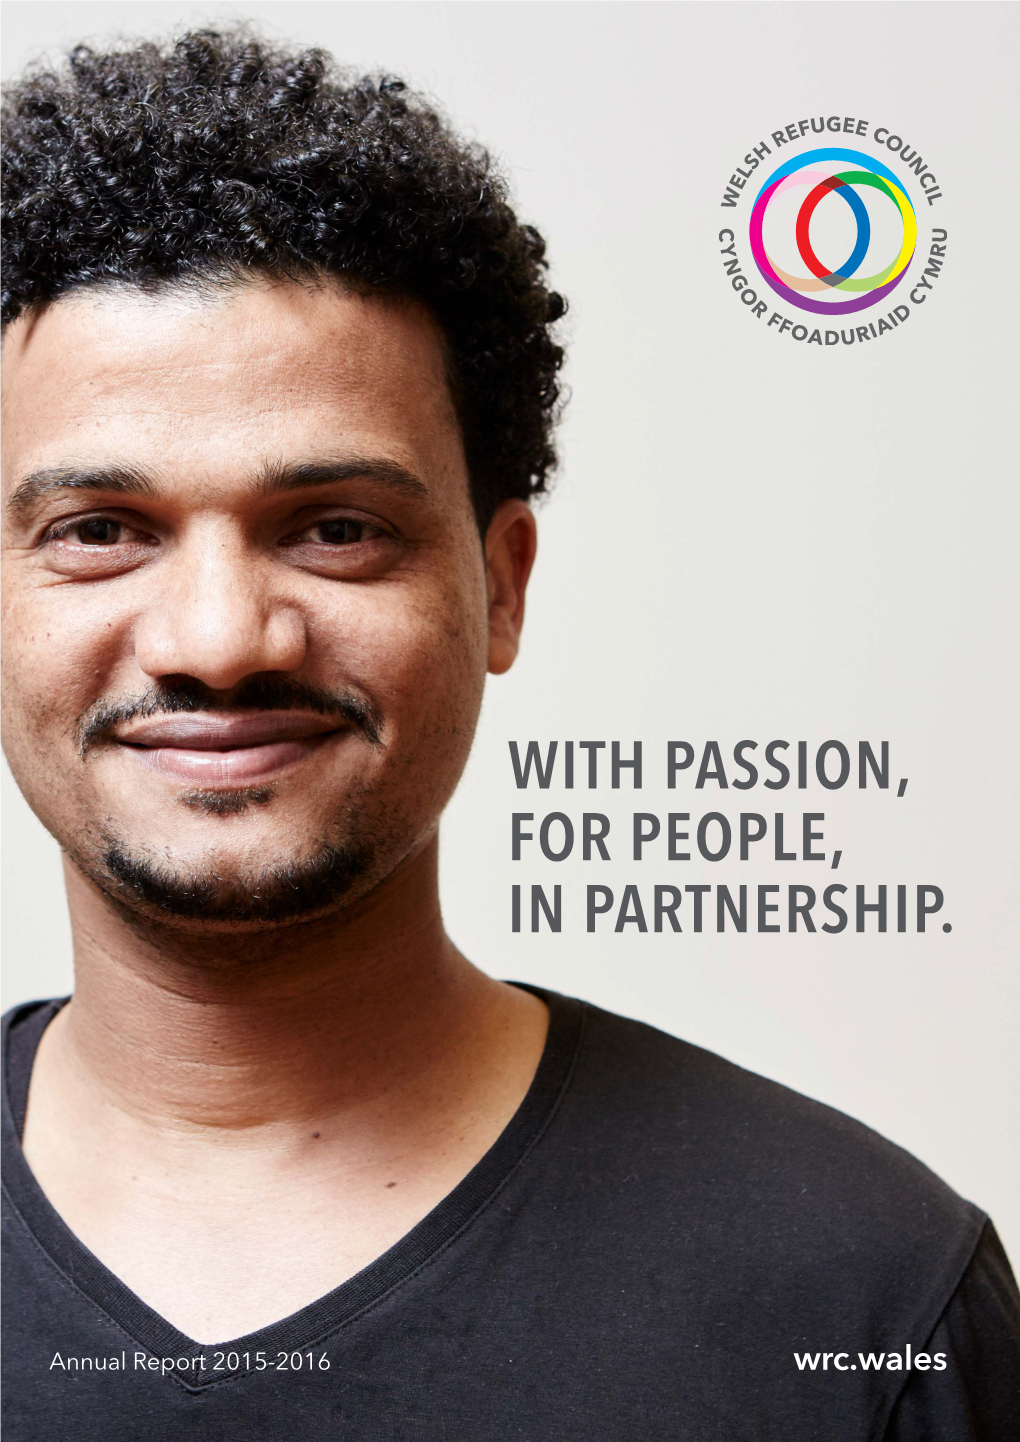 With Passion, for People, in Partnership